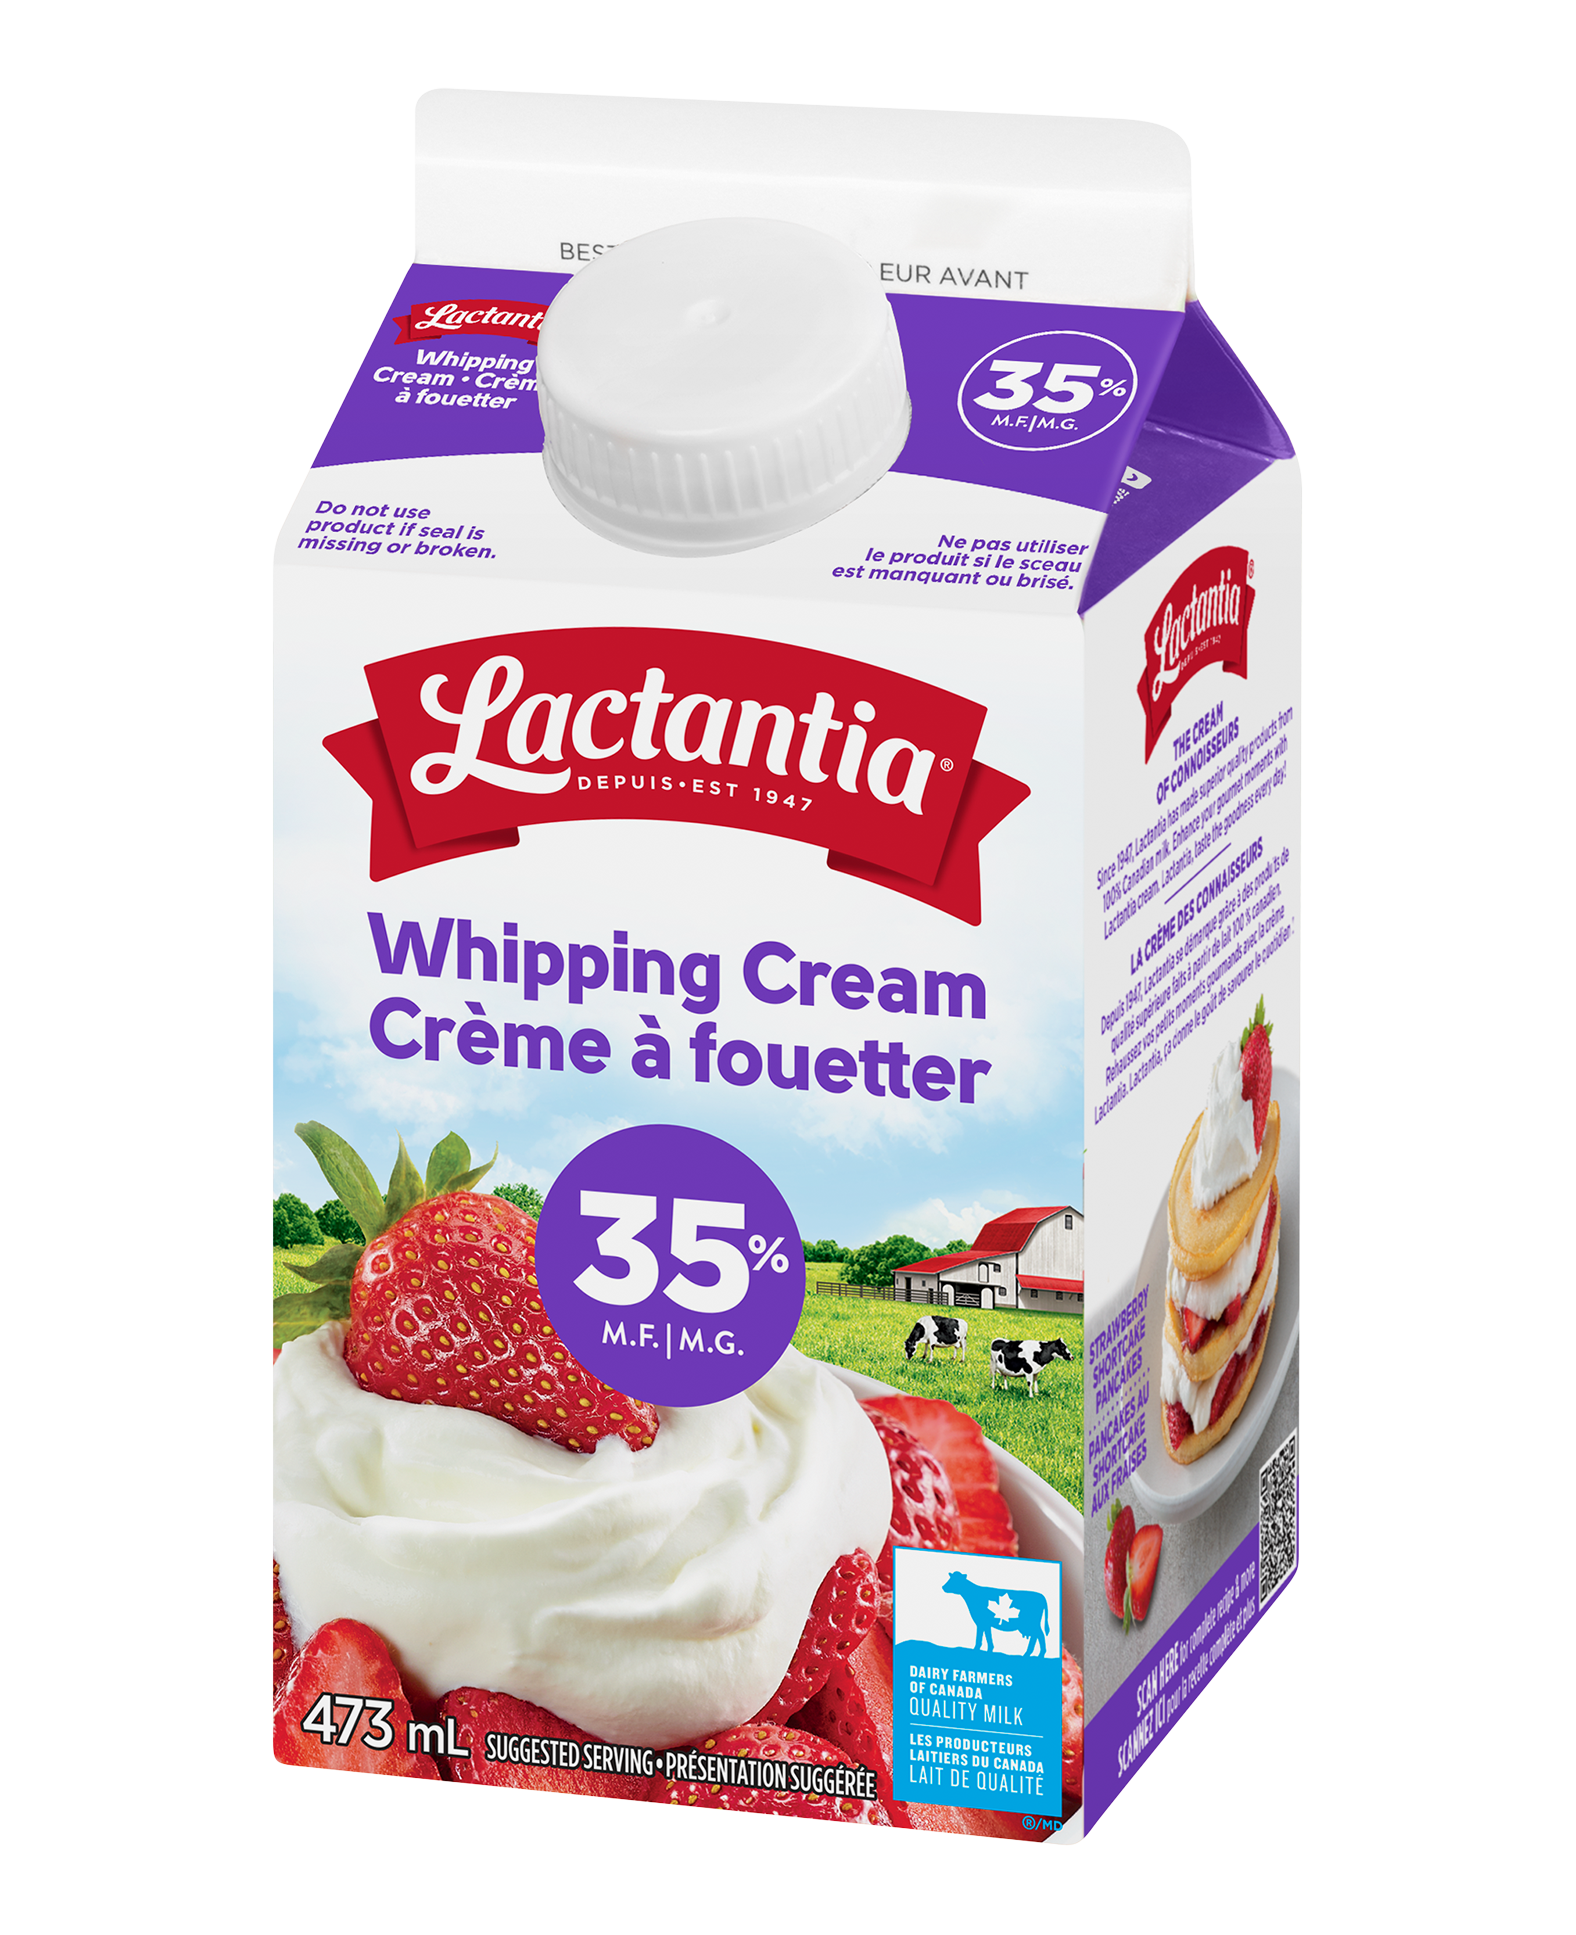 Lactantia<sup>®</sup> 35% Whipping Cream product image